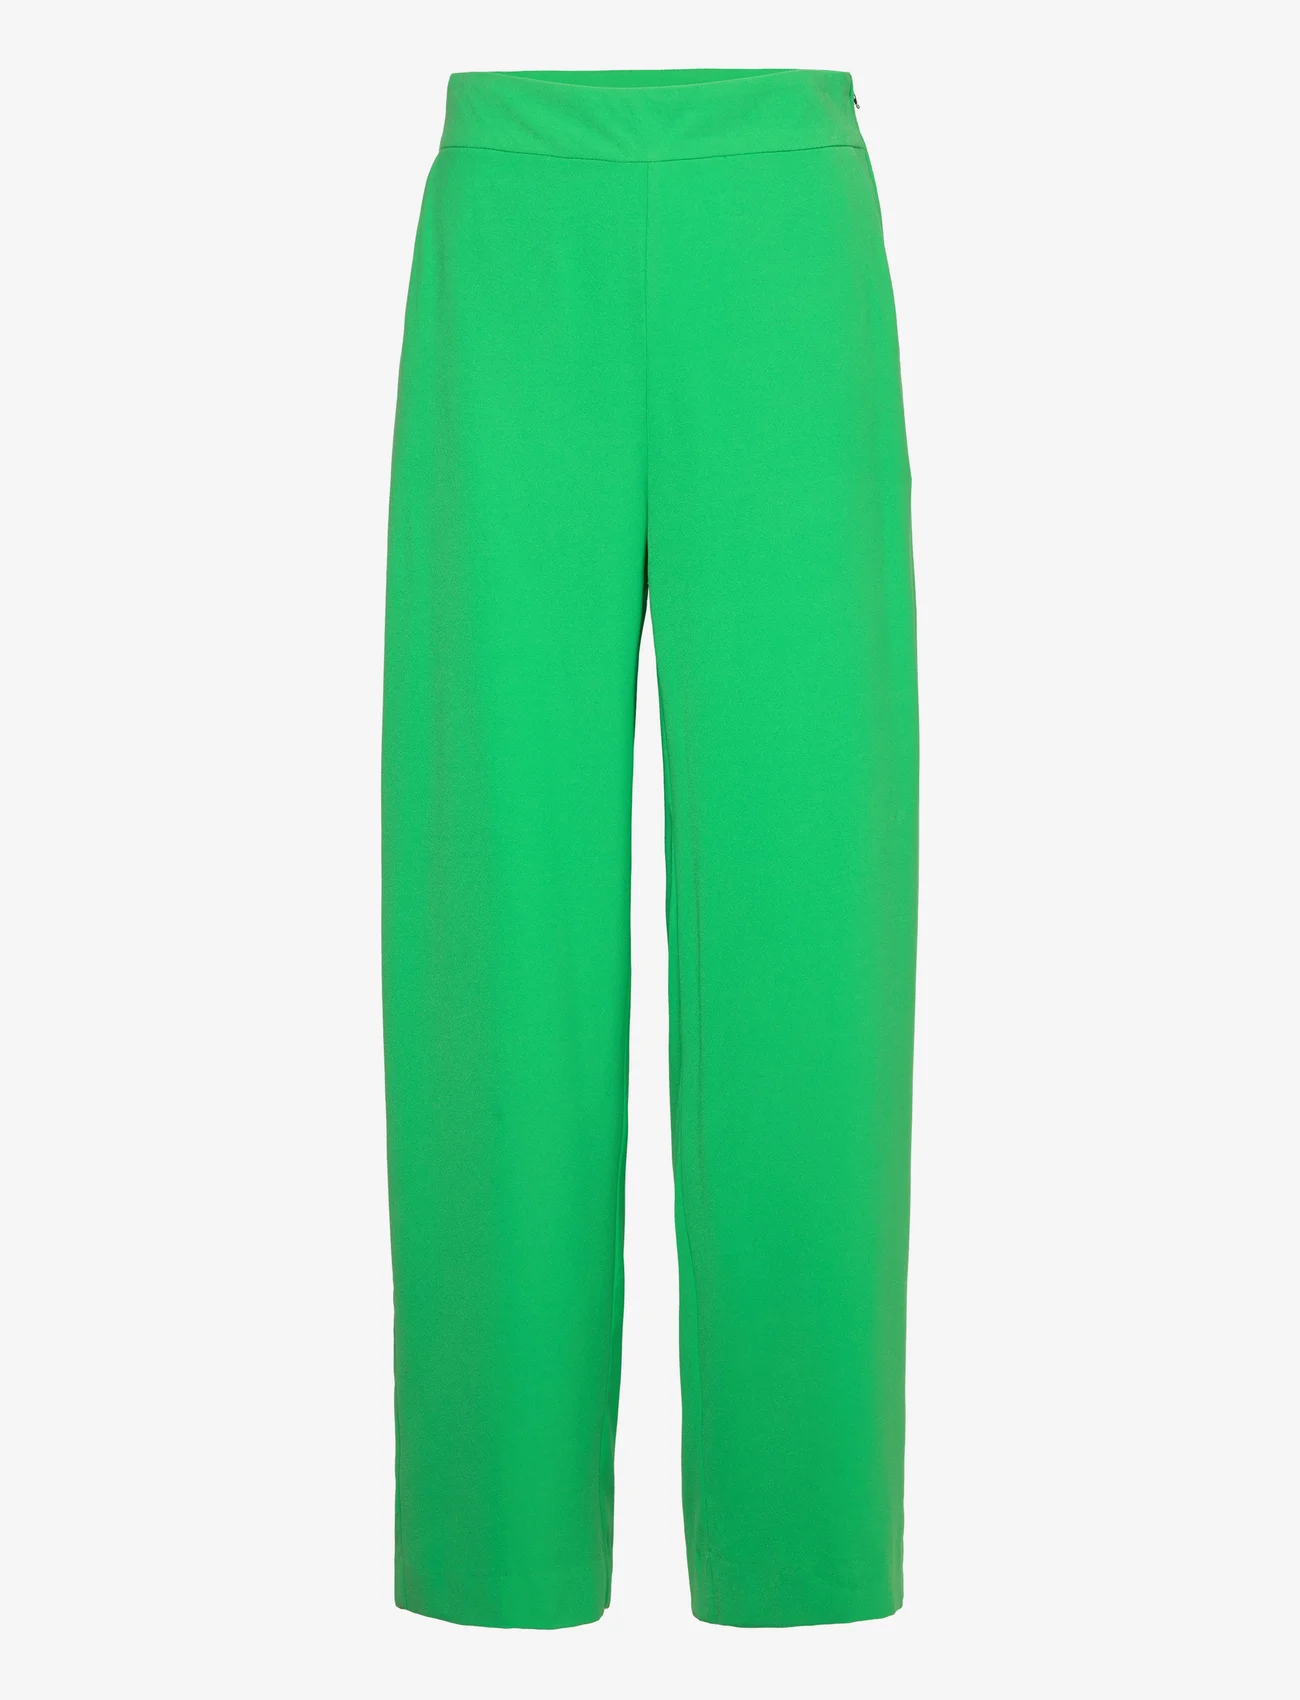 Lindex - Trousers Blair exclusive - leveälahkeiset housut - strong green - 0